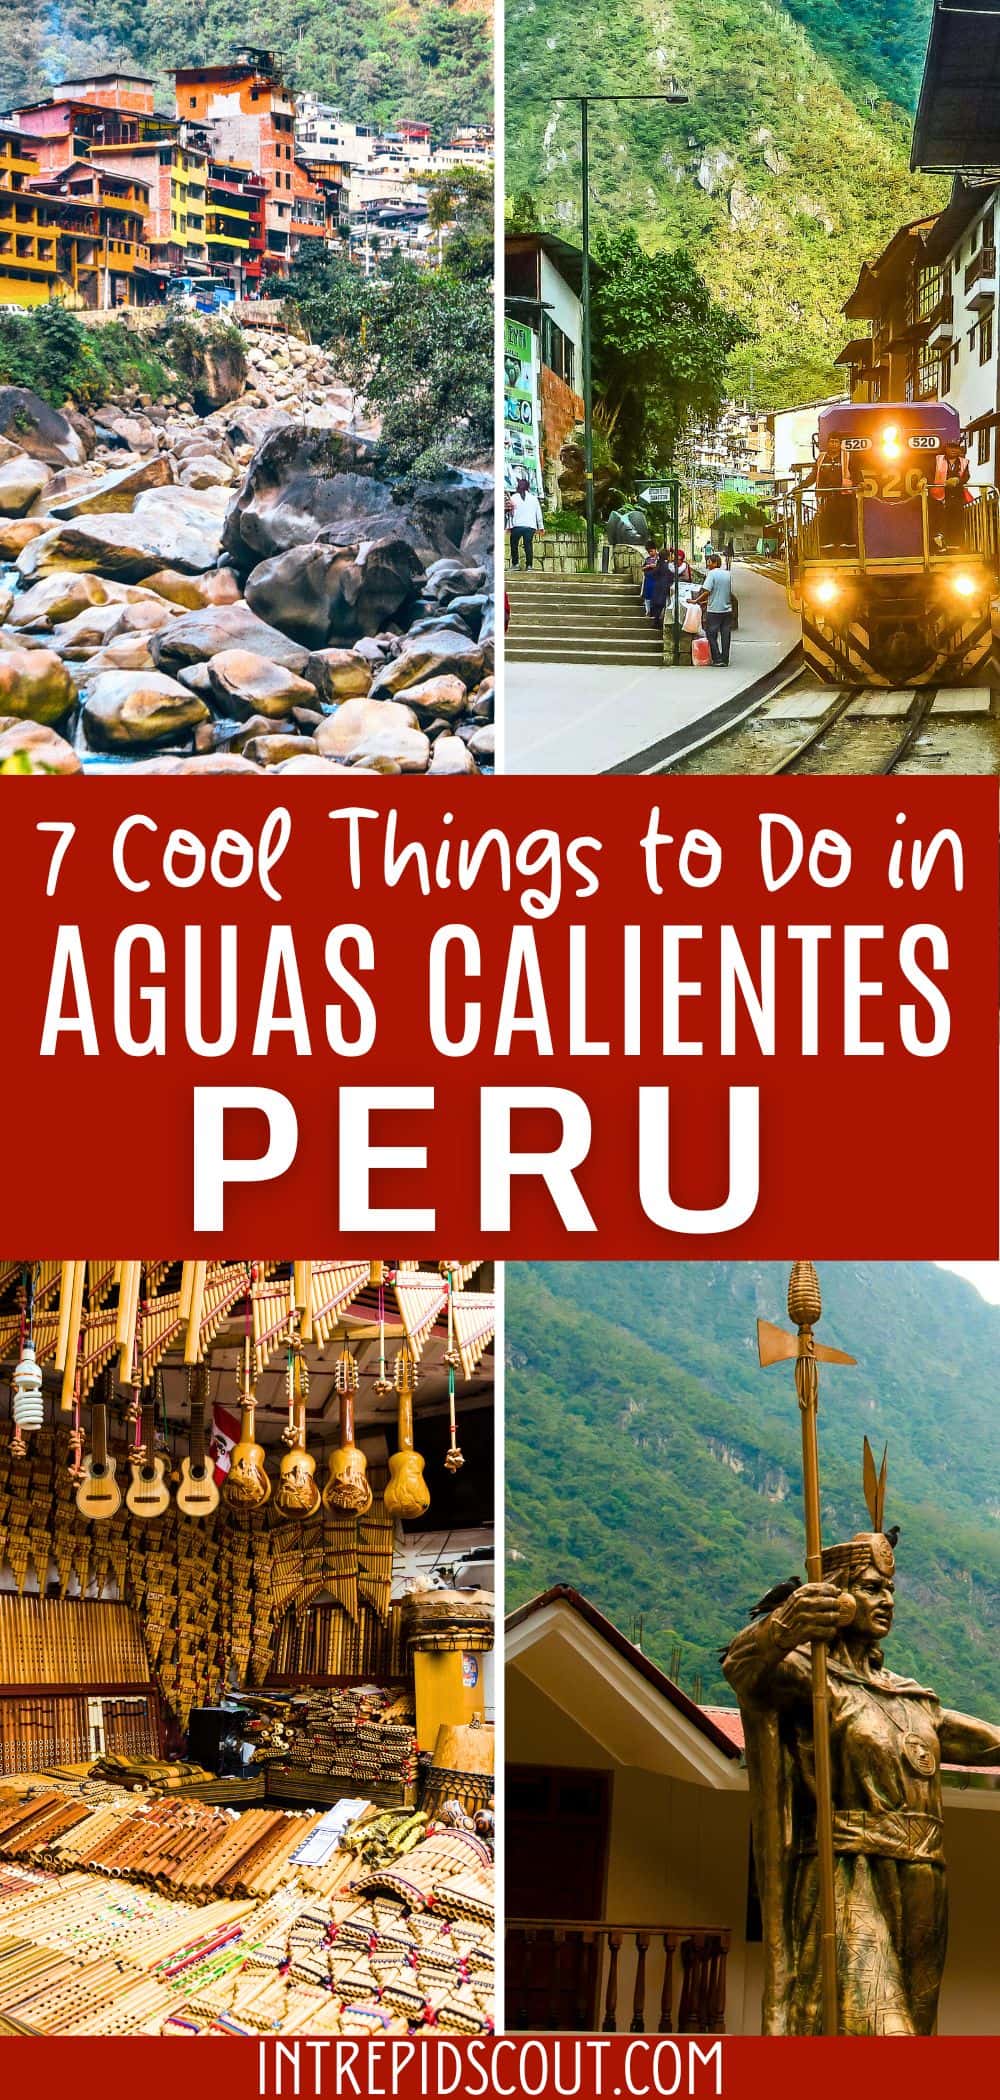 Things to Do in Aguas Calientes